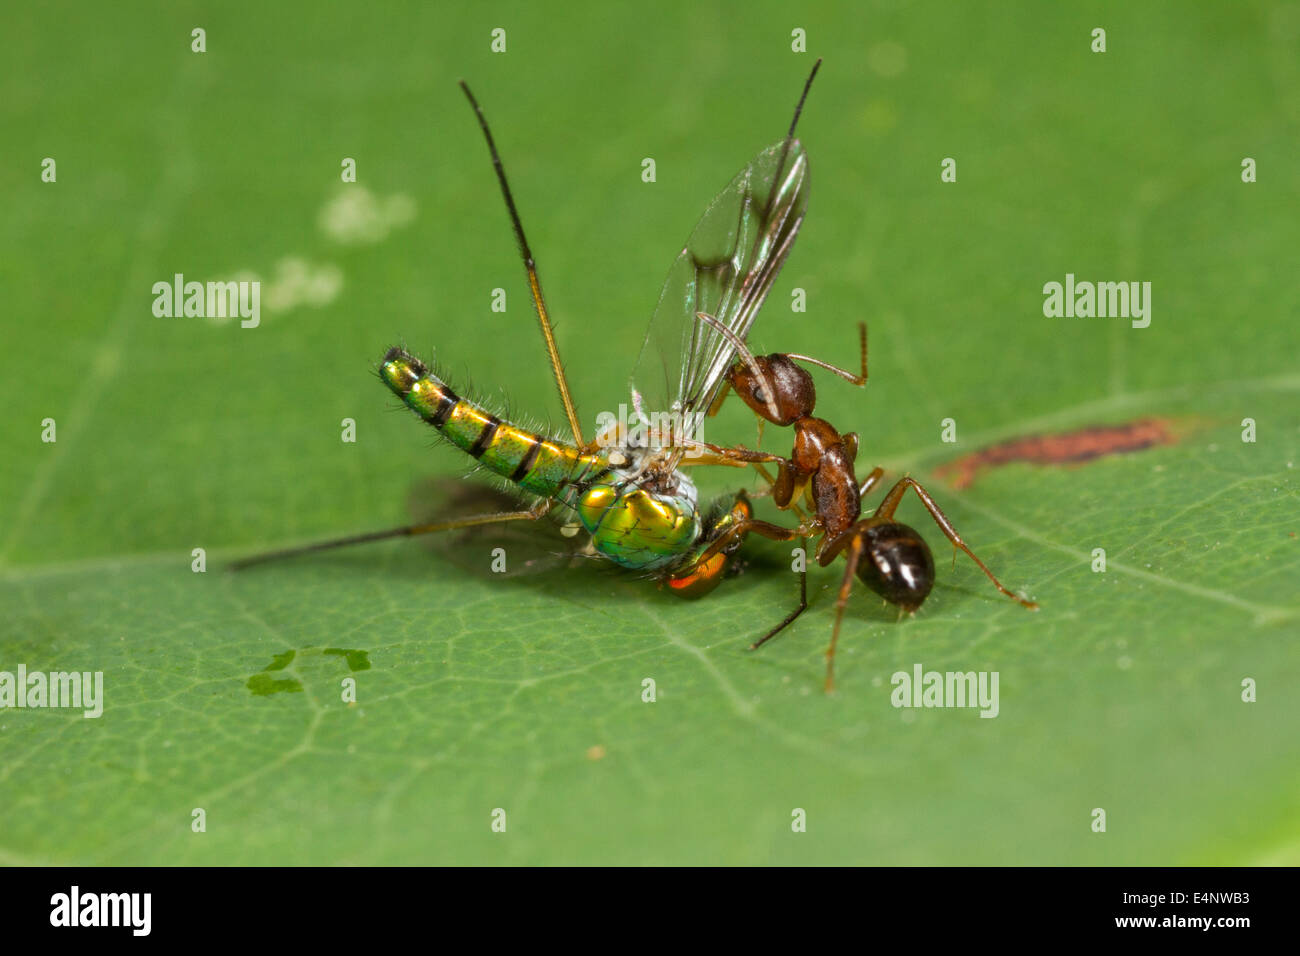 Ant dragging a long legged fly. Stock Photo